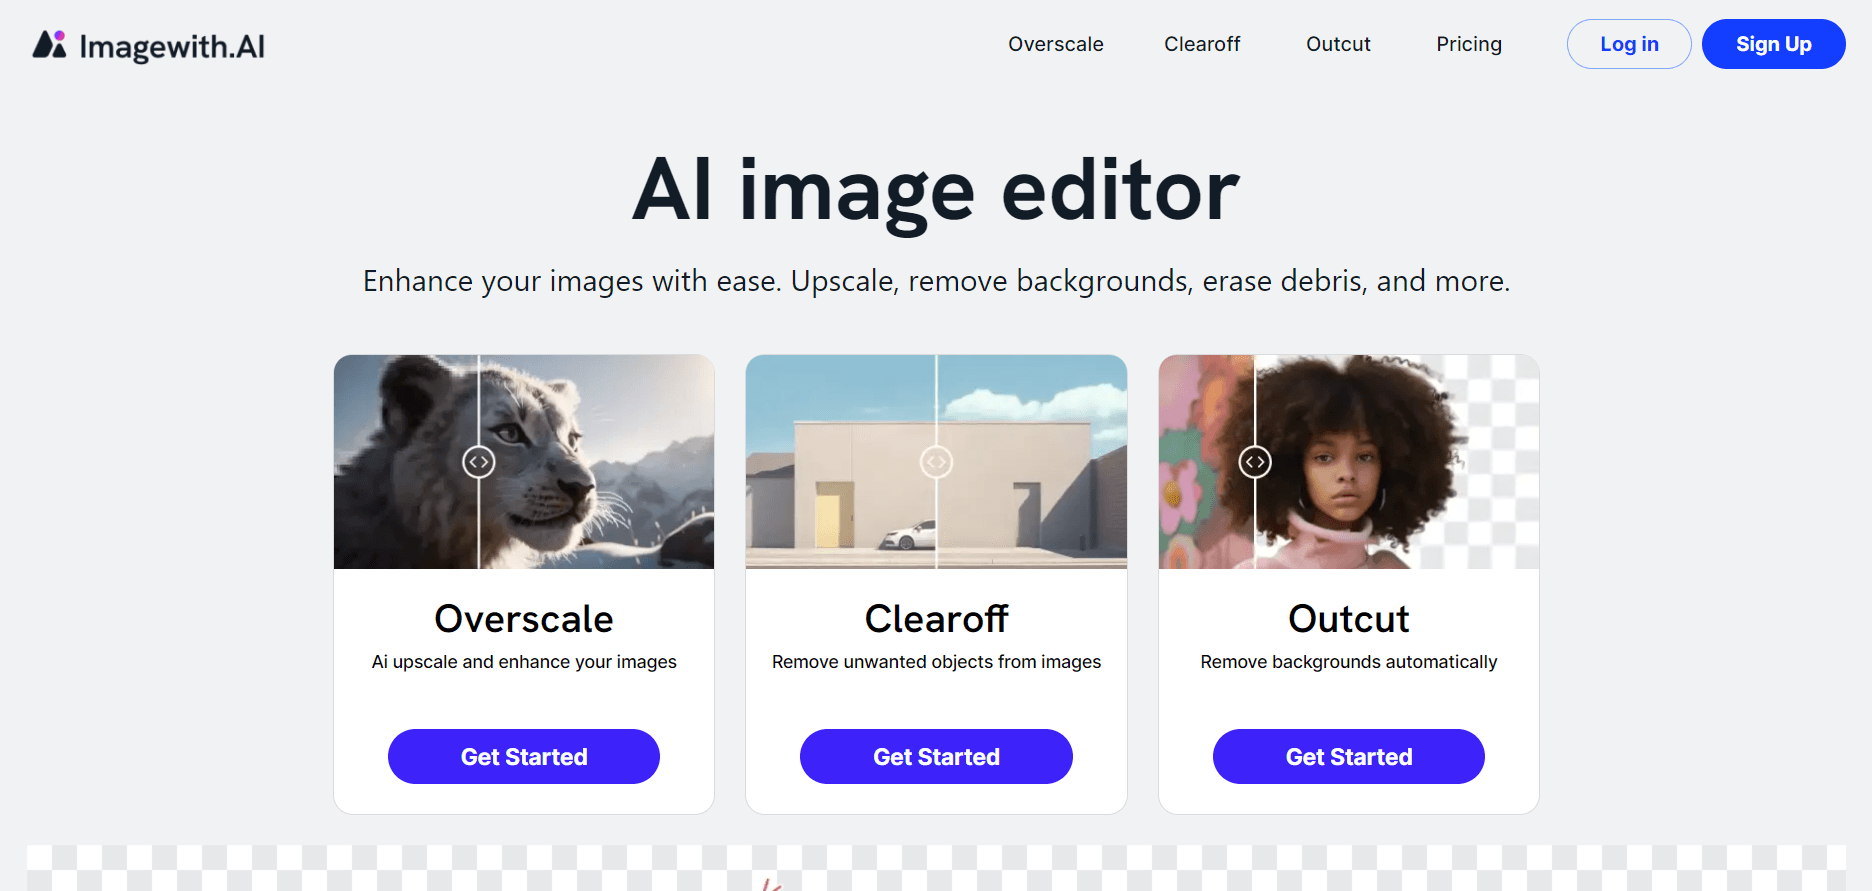 The interface of Imagewith.ai